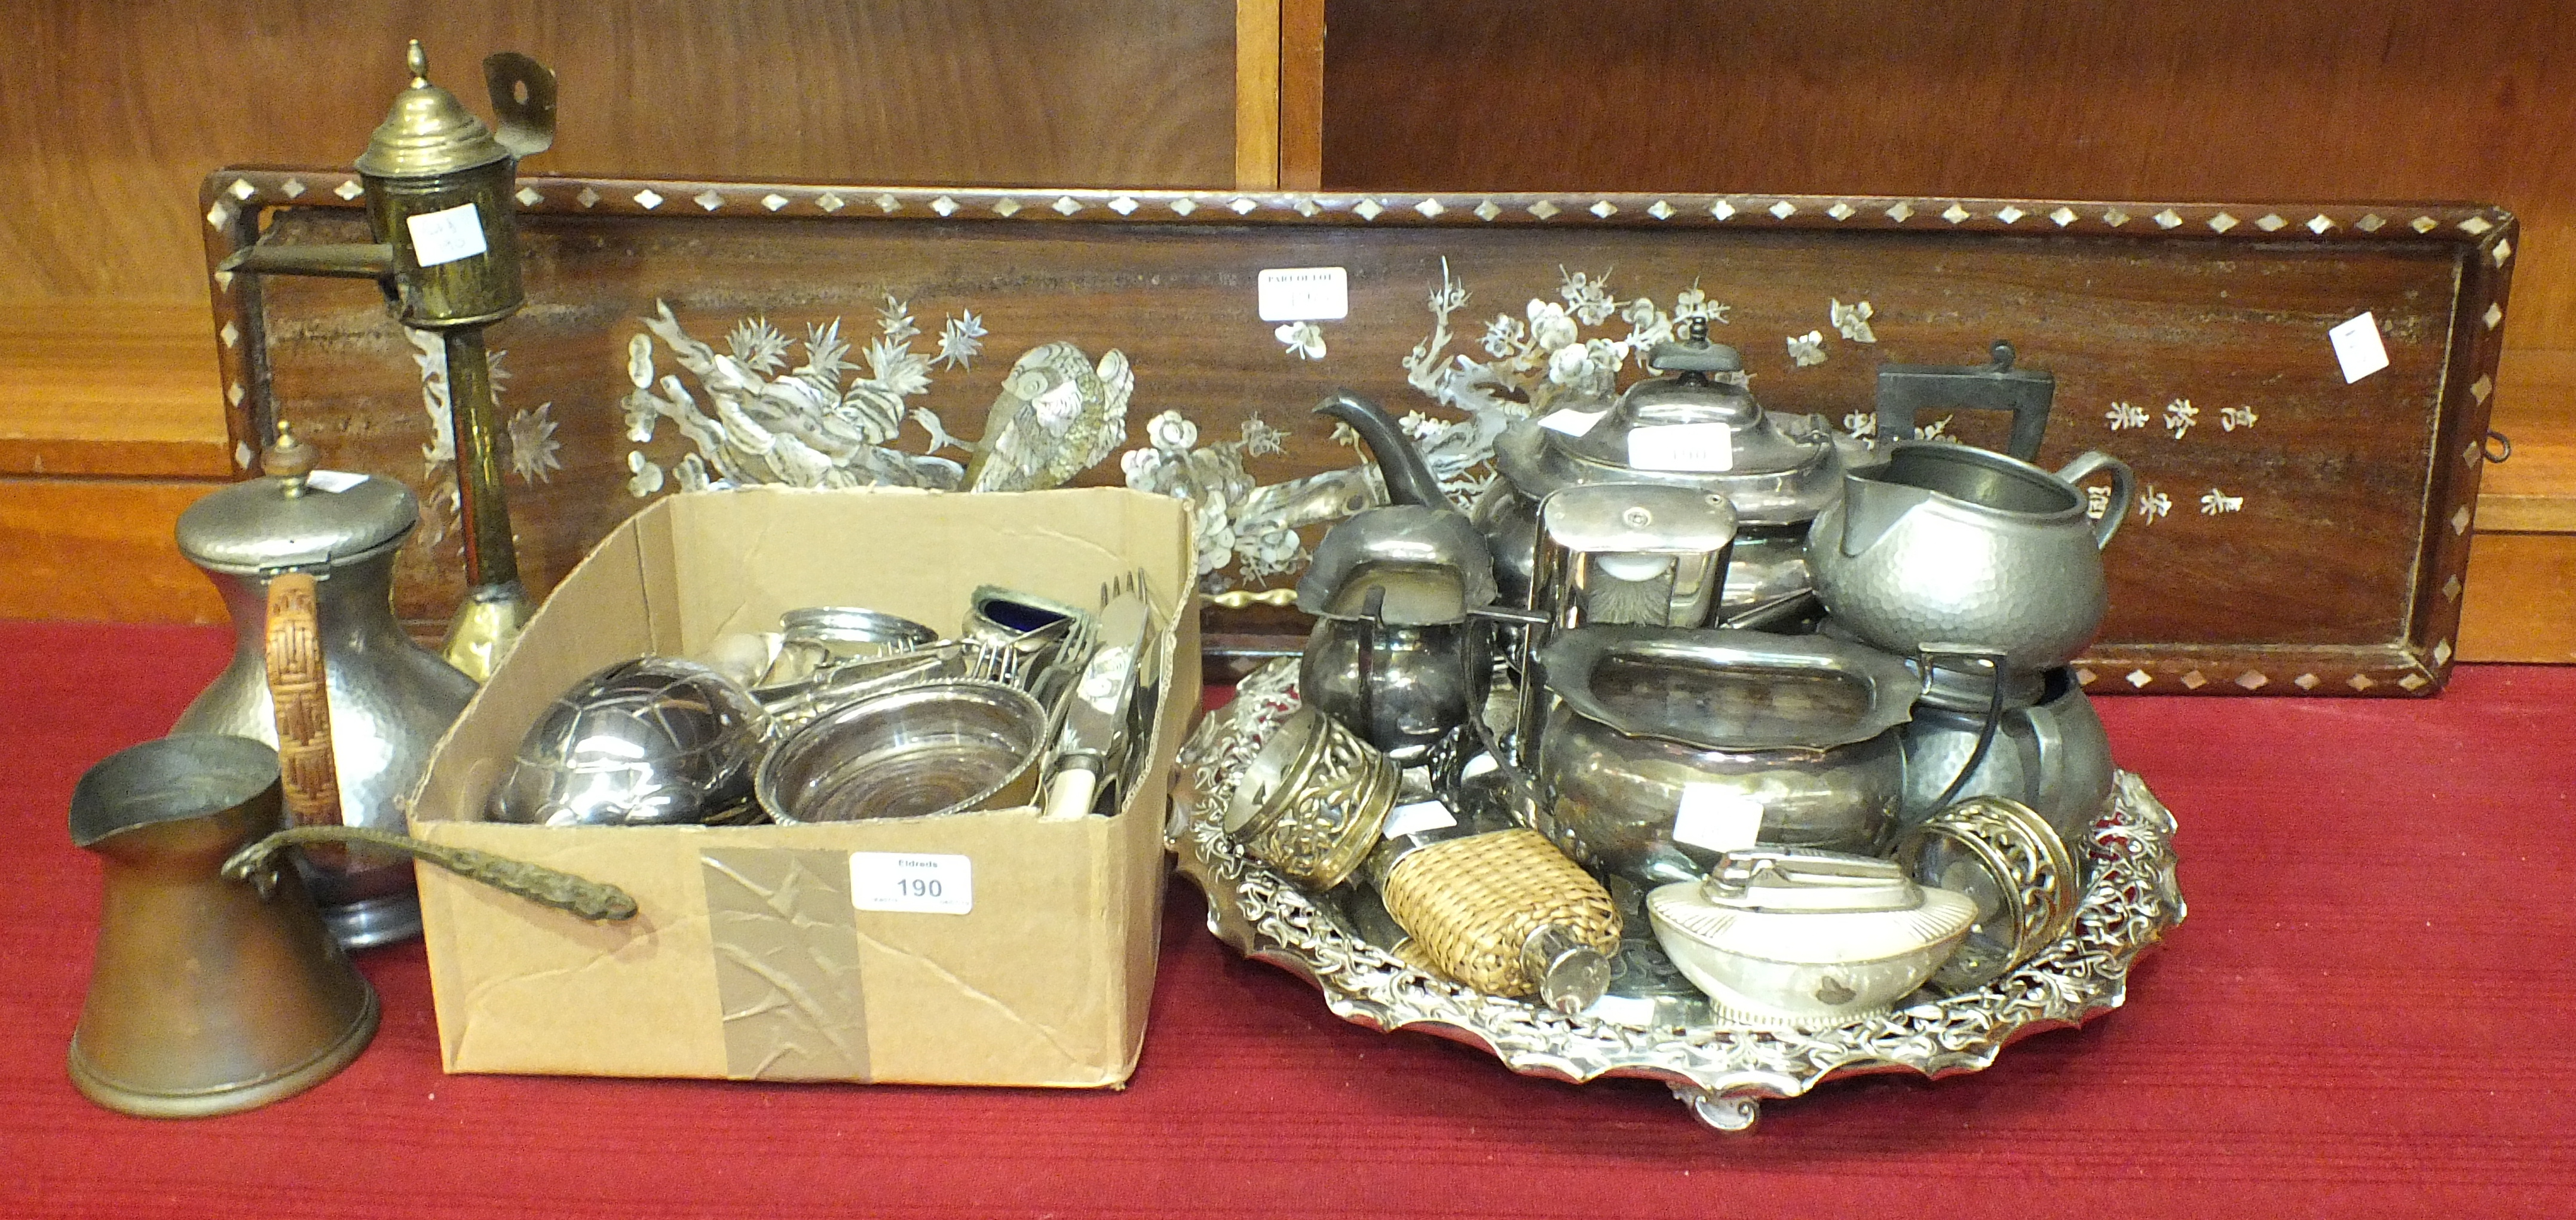 A quantity of plated cutlery, a three-piece plated tea service, other platedware and metalware.